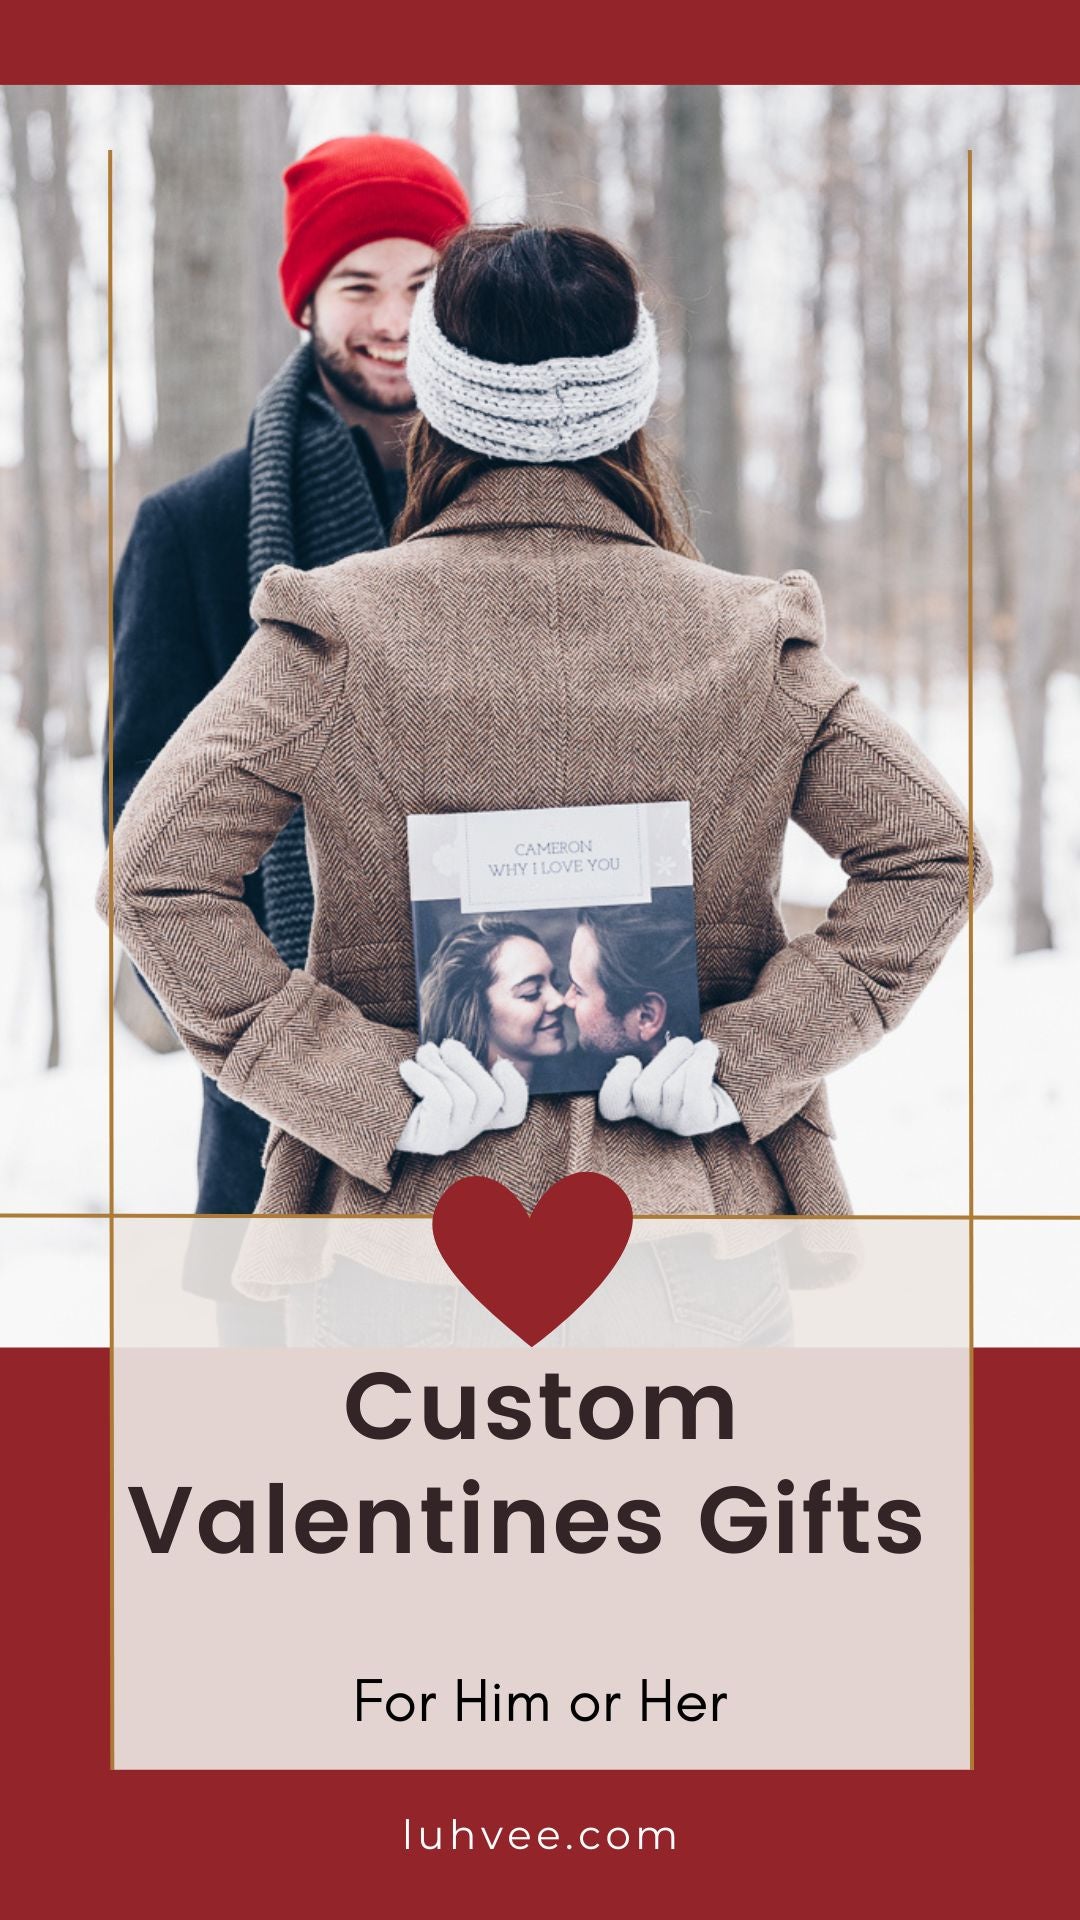 Custom Valentines Gifts For Him or Her By Luhvee Books